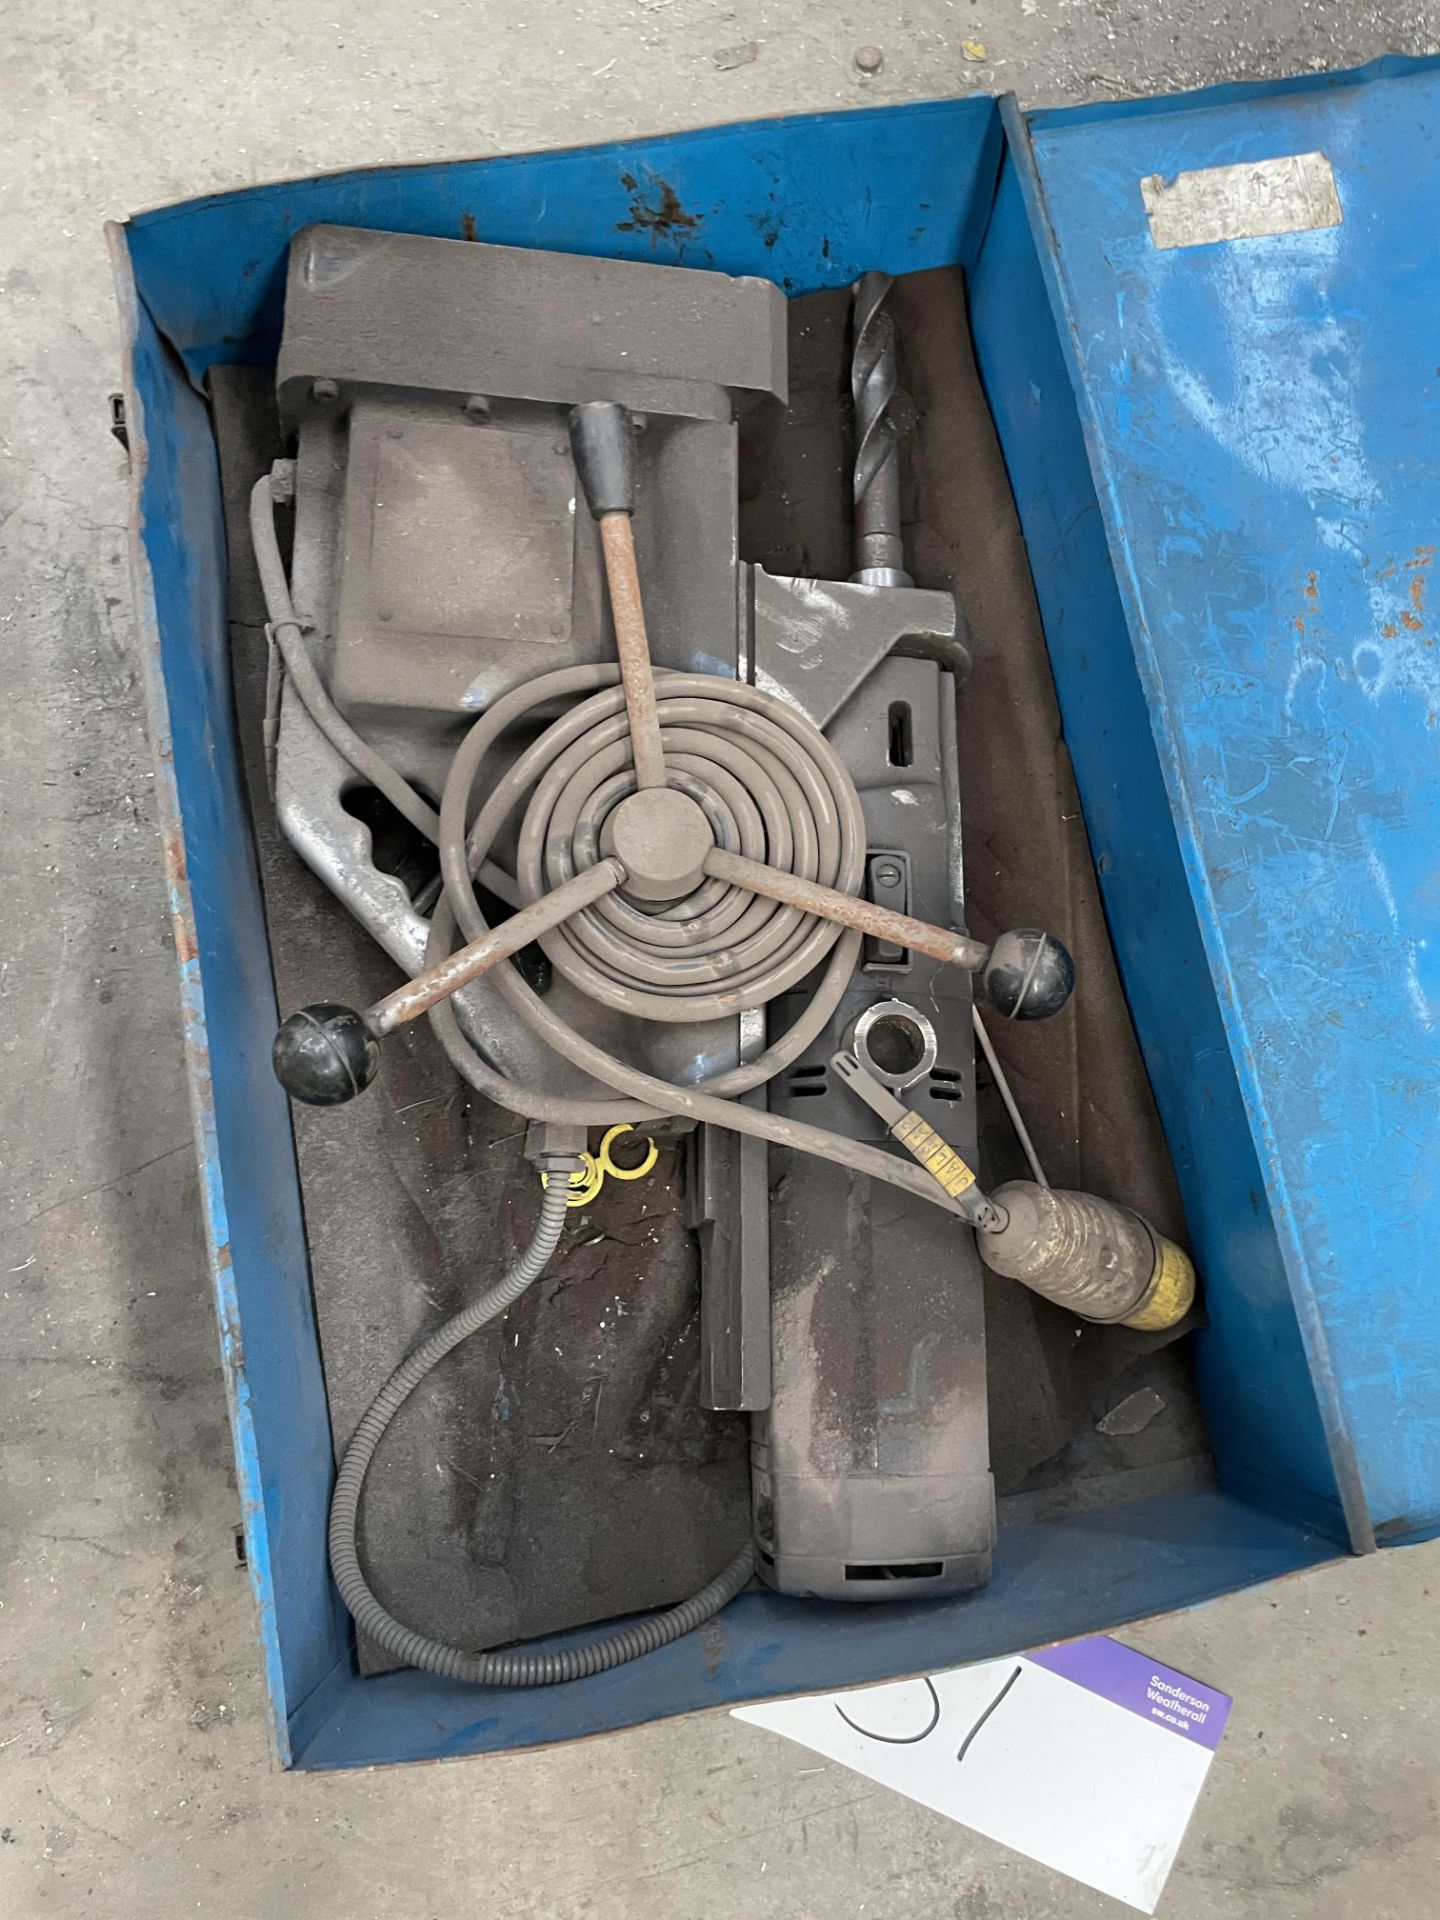 Magnetic Drill Stand, with drill, 110V and case, lot located at Ocean Raw Ltd & Jalna Construction - Bild 2 aus 2